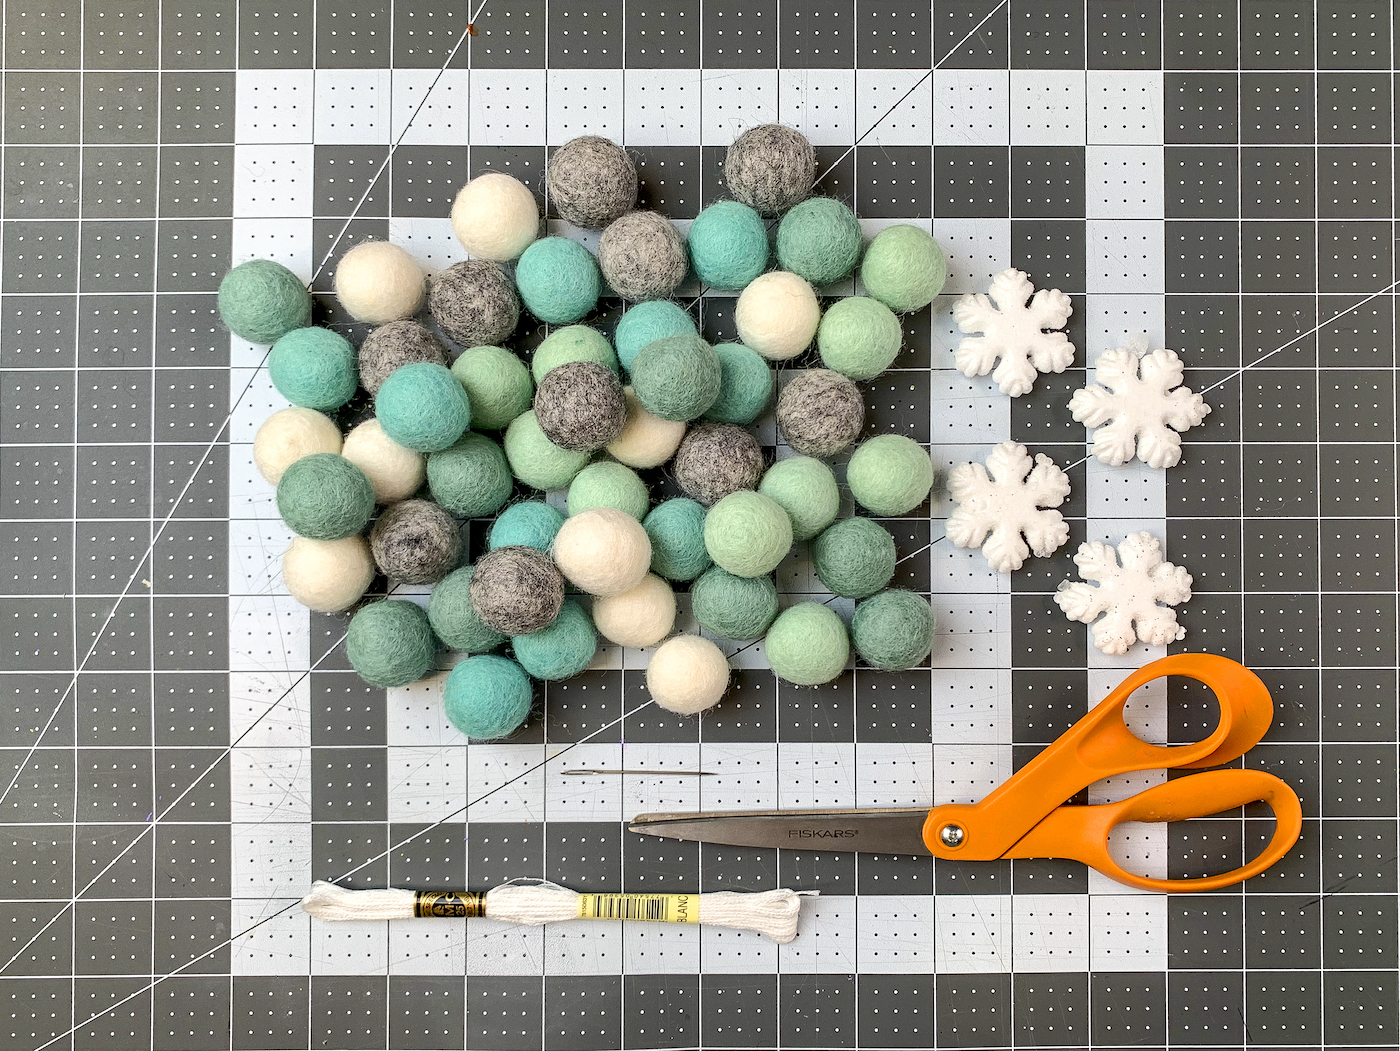 Felt balls, foam snowflakes, embroidery floss, scissors, and a tapestry needle